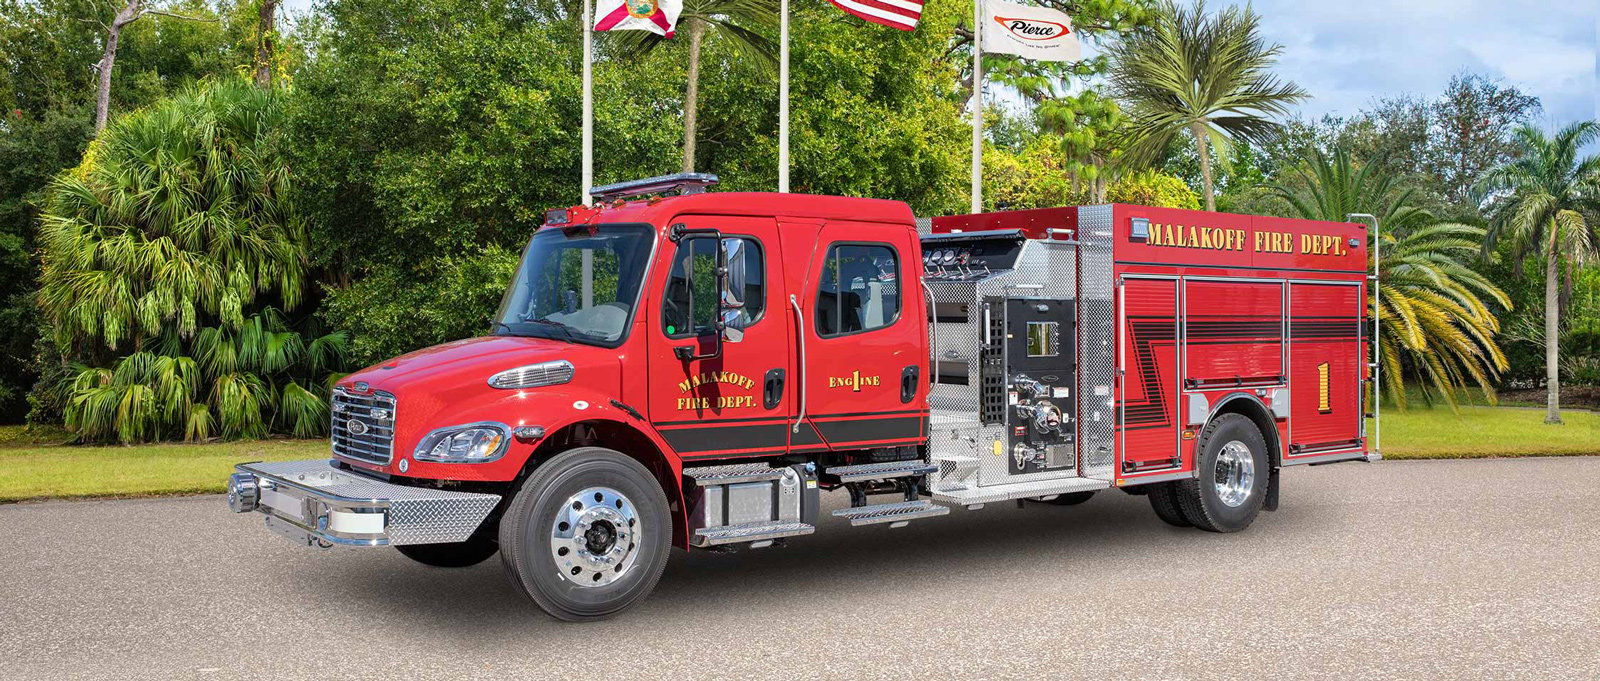 The Malakoff Volunteer Fire Department red and white pumper fire truck is parked on asphalt in a warm climate showcasing the driver side features.